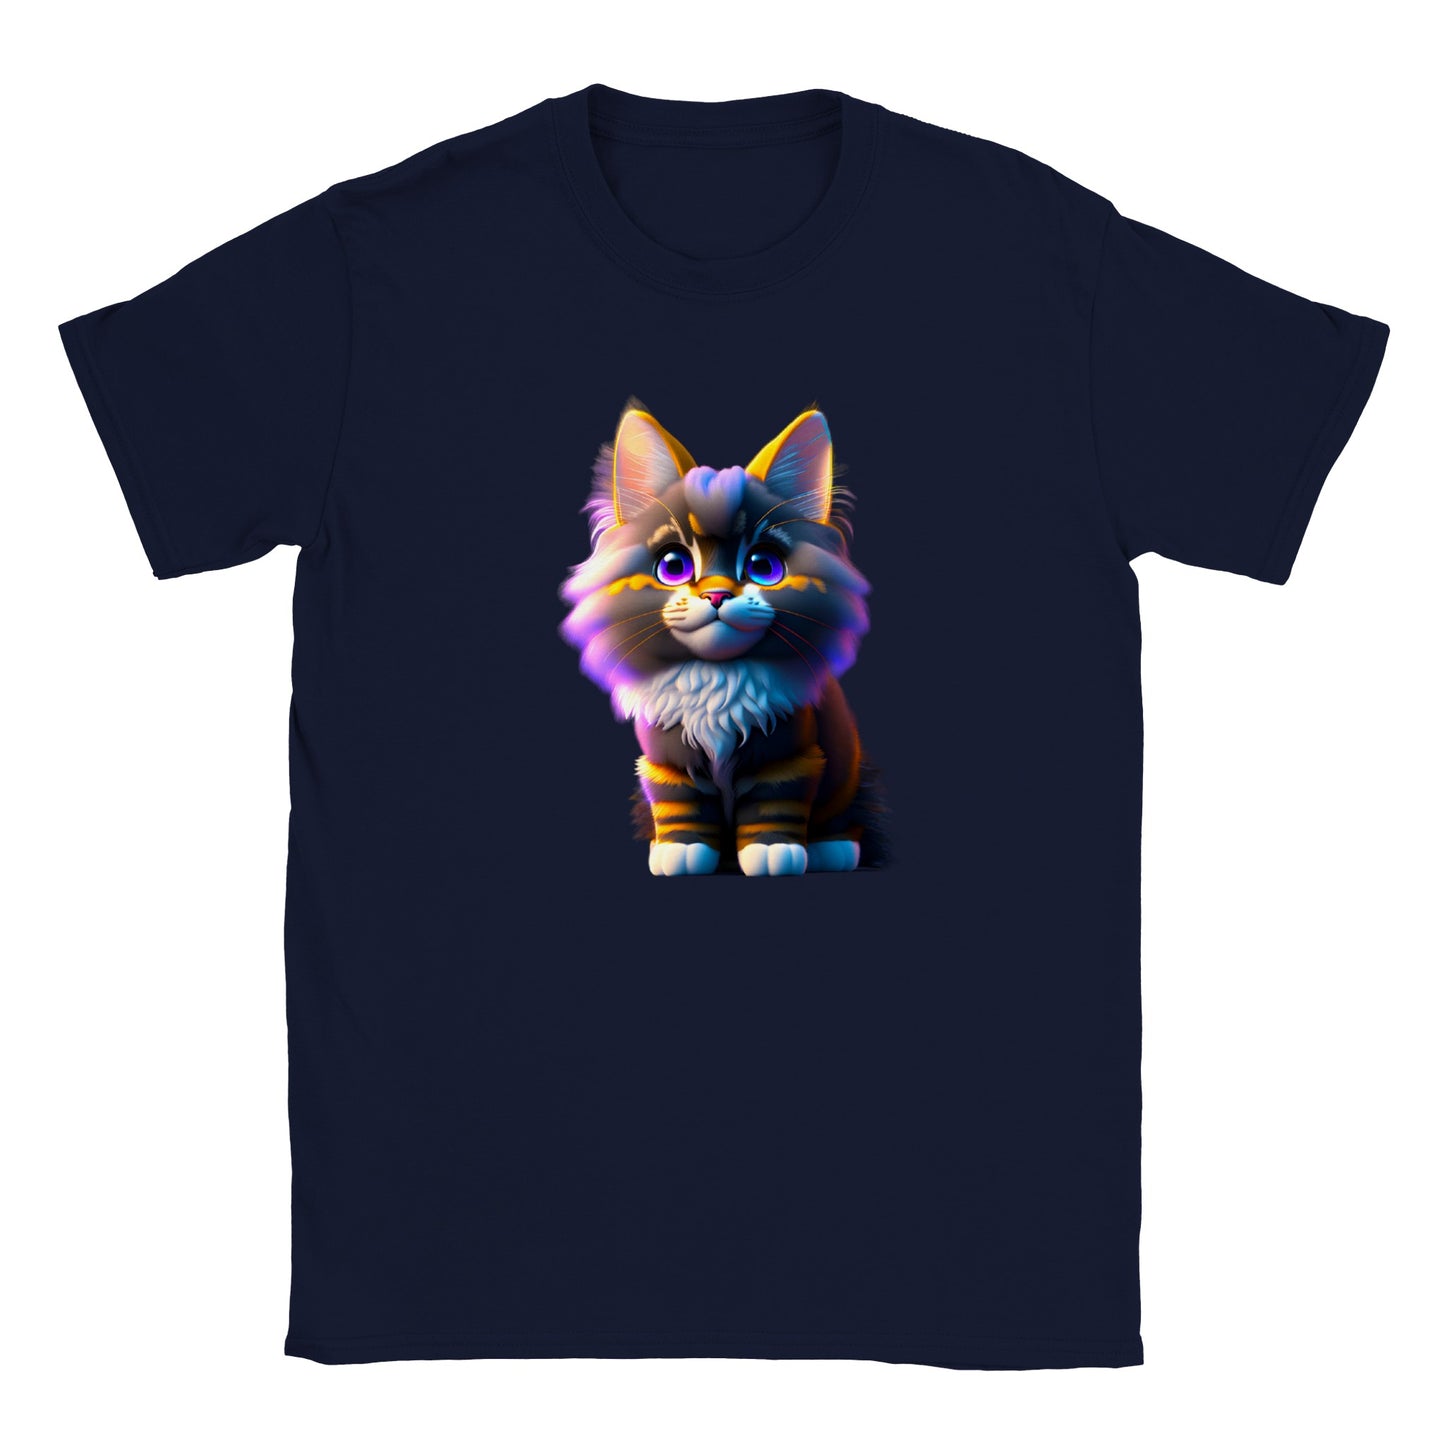 Adorable, Cool, Cute Cats and Kittens Toy - Classic Kids Crewneck T-Shirt 18